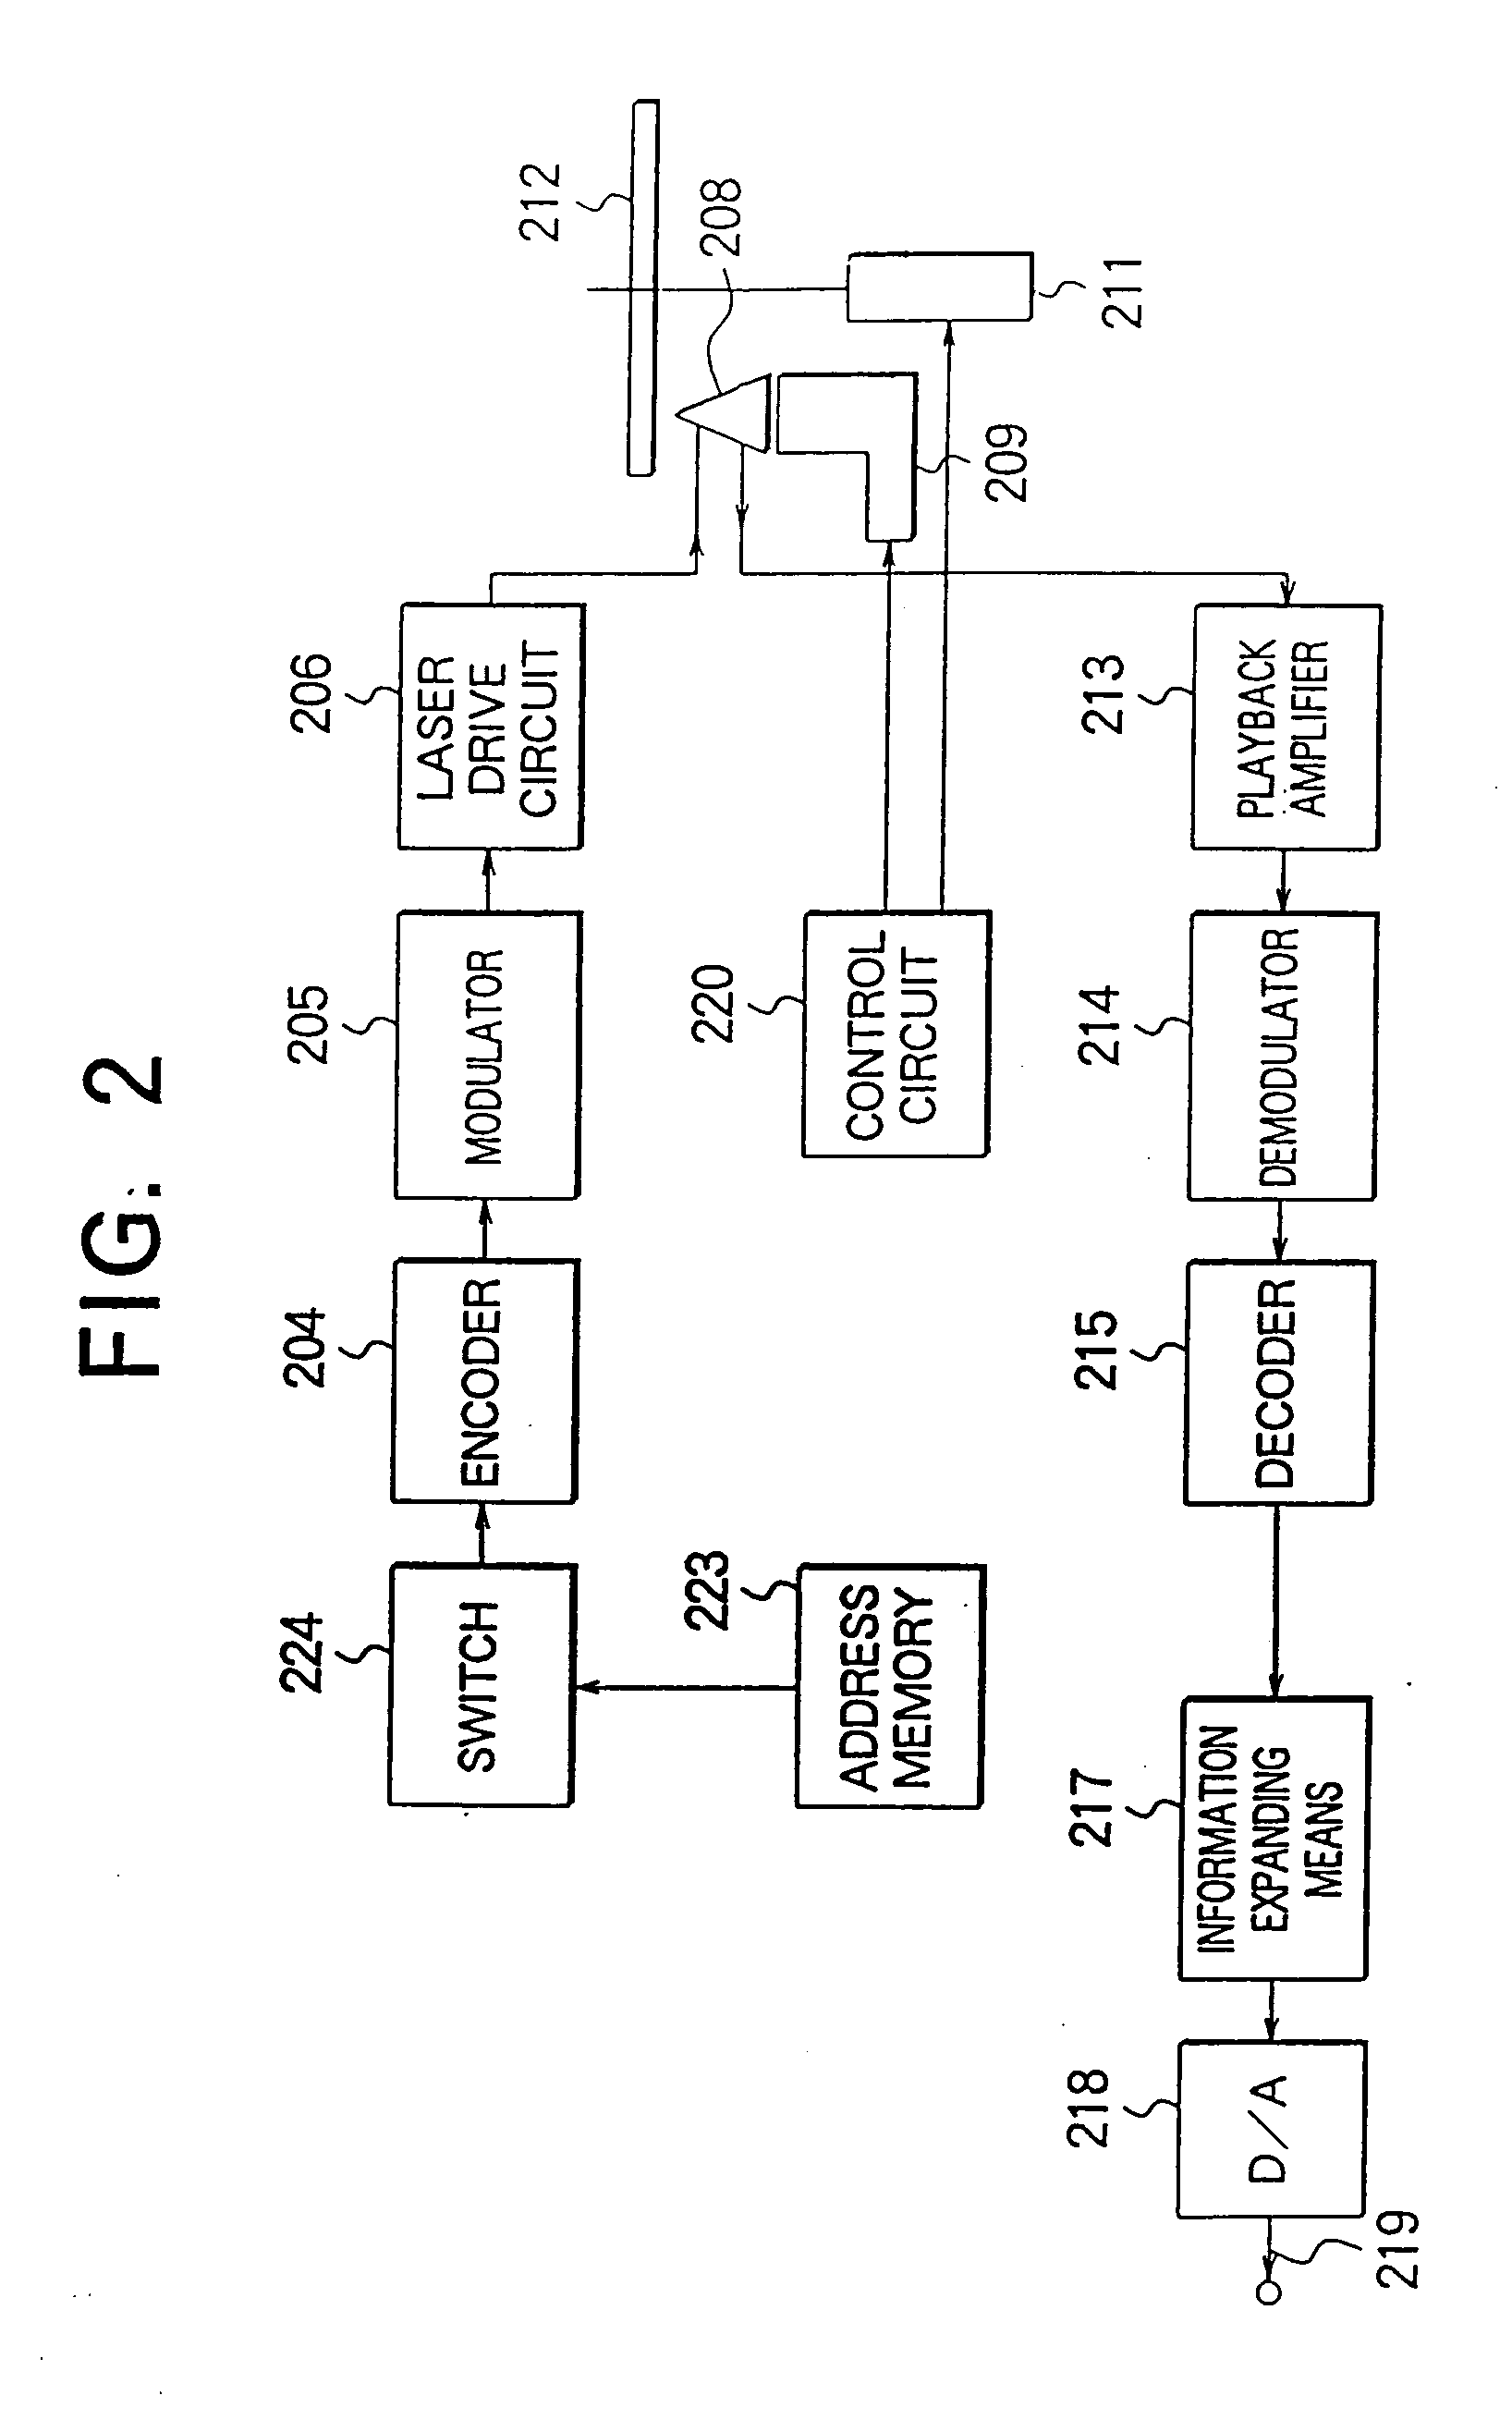 Disk media, and method of and device for recording and playing back information on or from a disk media